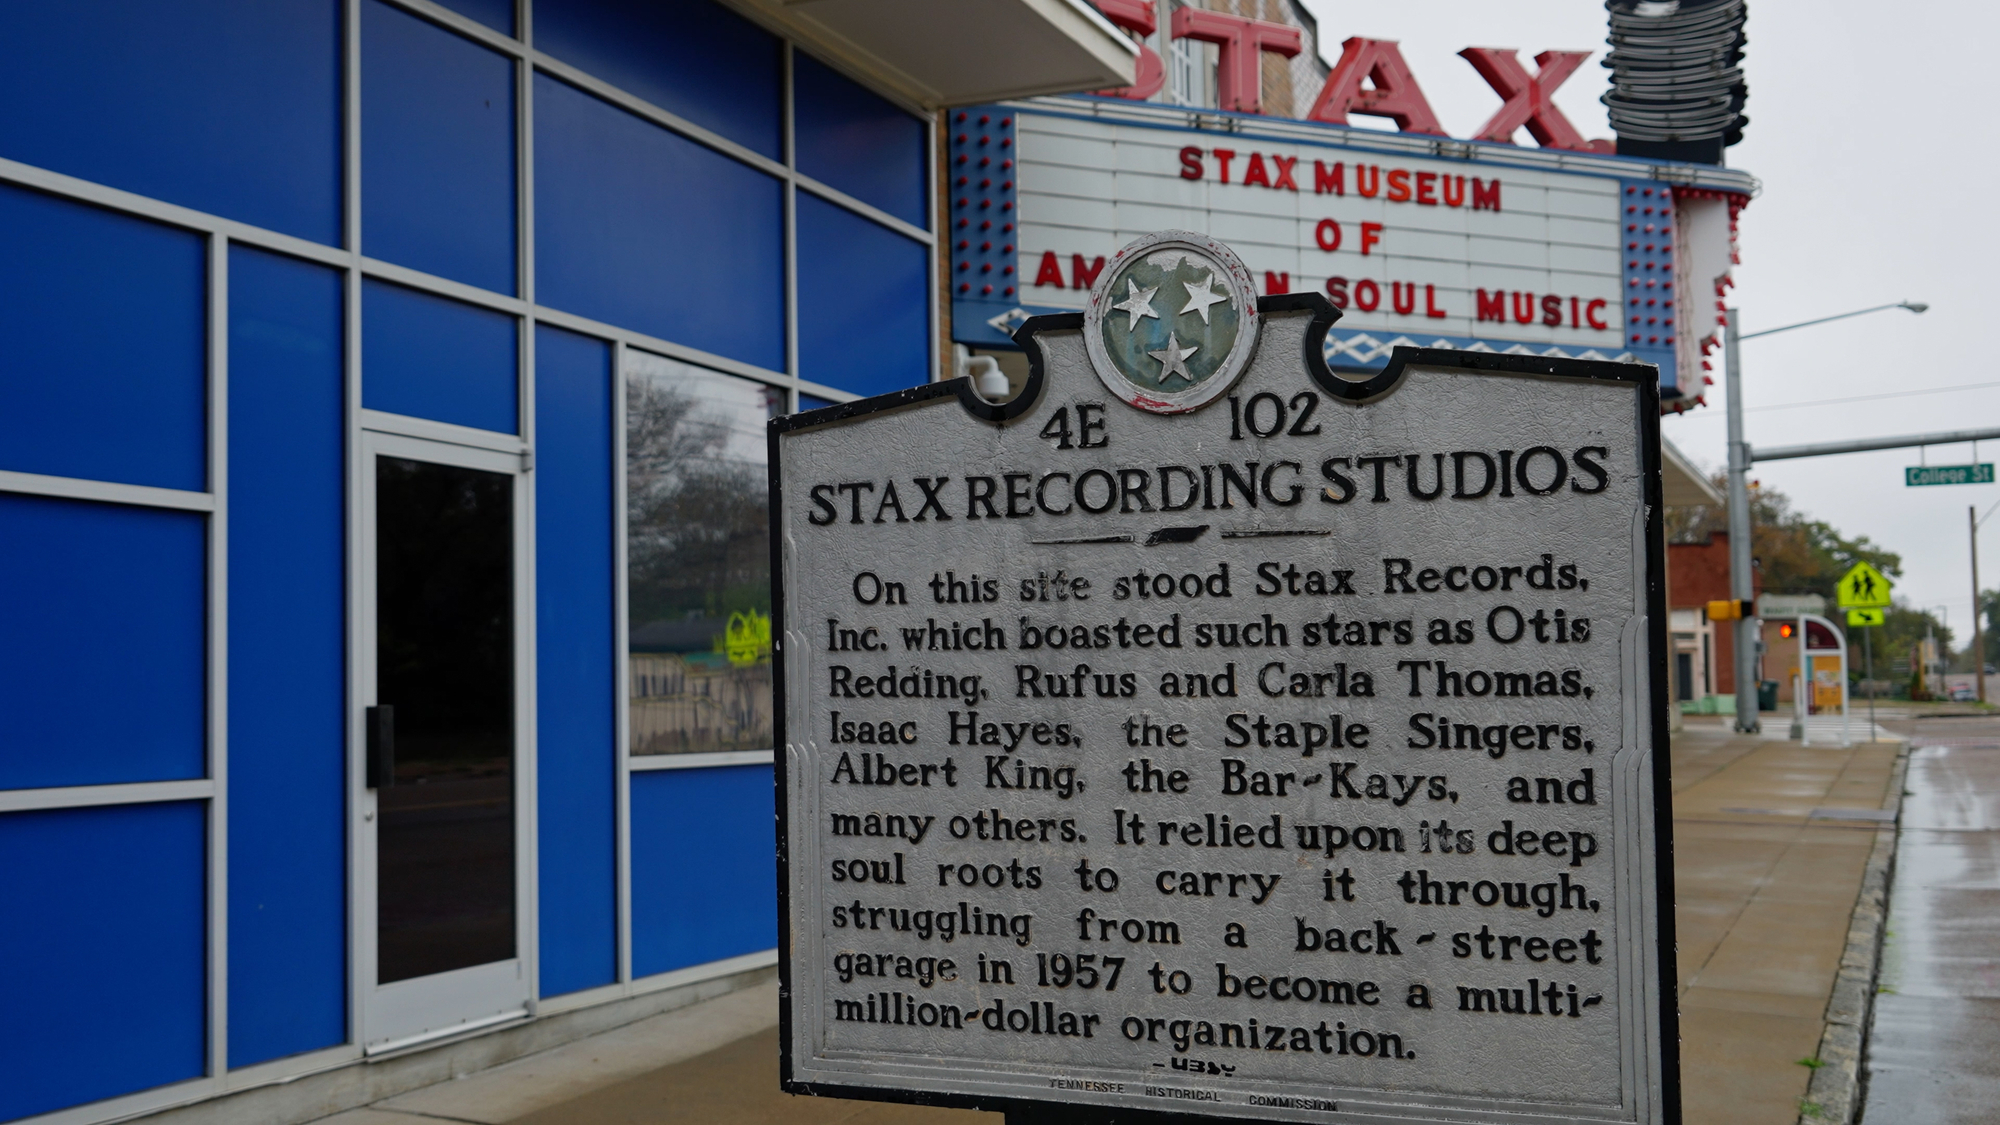 Stax Museum Of American Soul Music